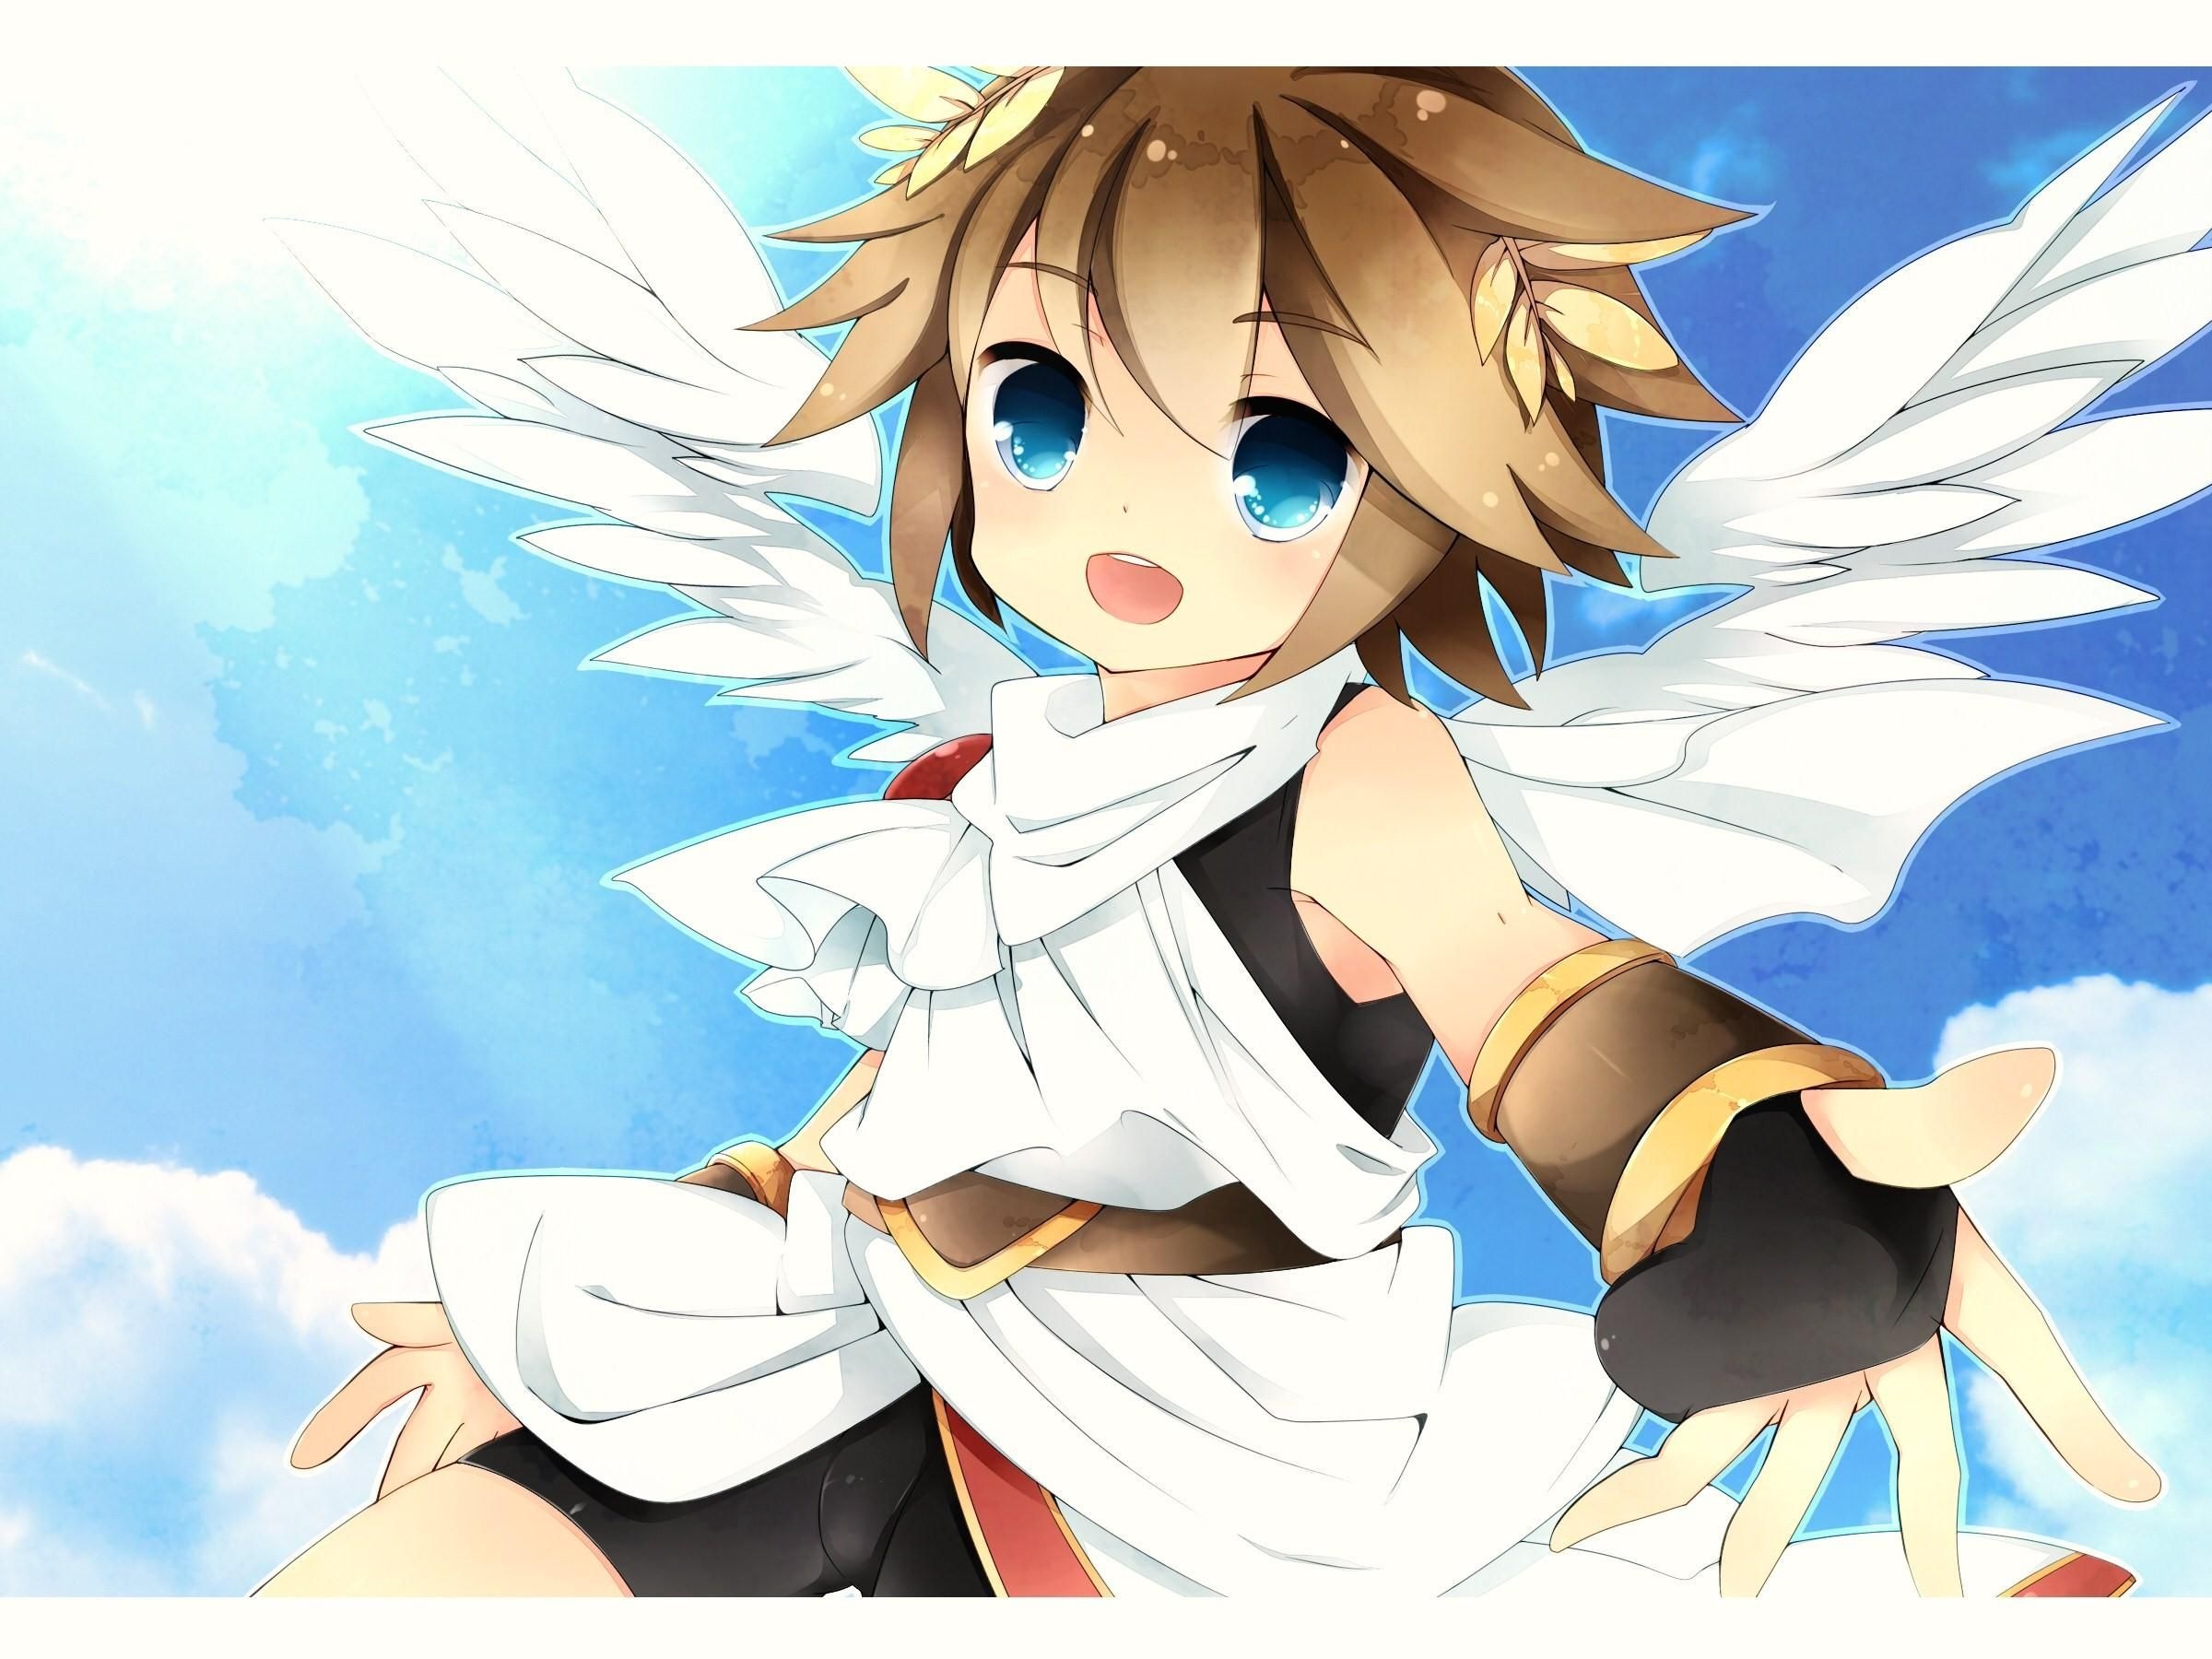 Kid Icarus HD wallpapers, Widescreen format, High-definition images, Captivating artwork, 2400x1800 HD Desktop